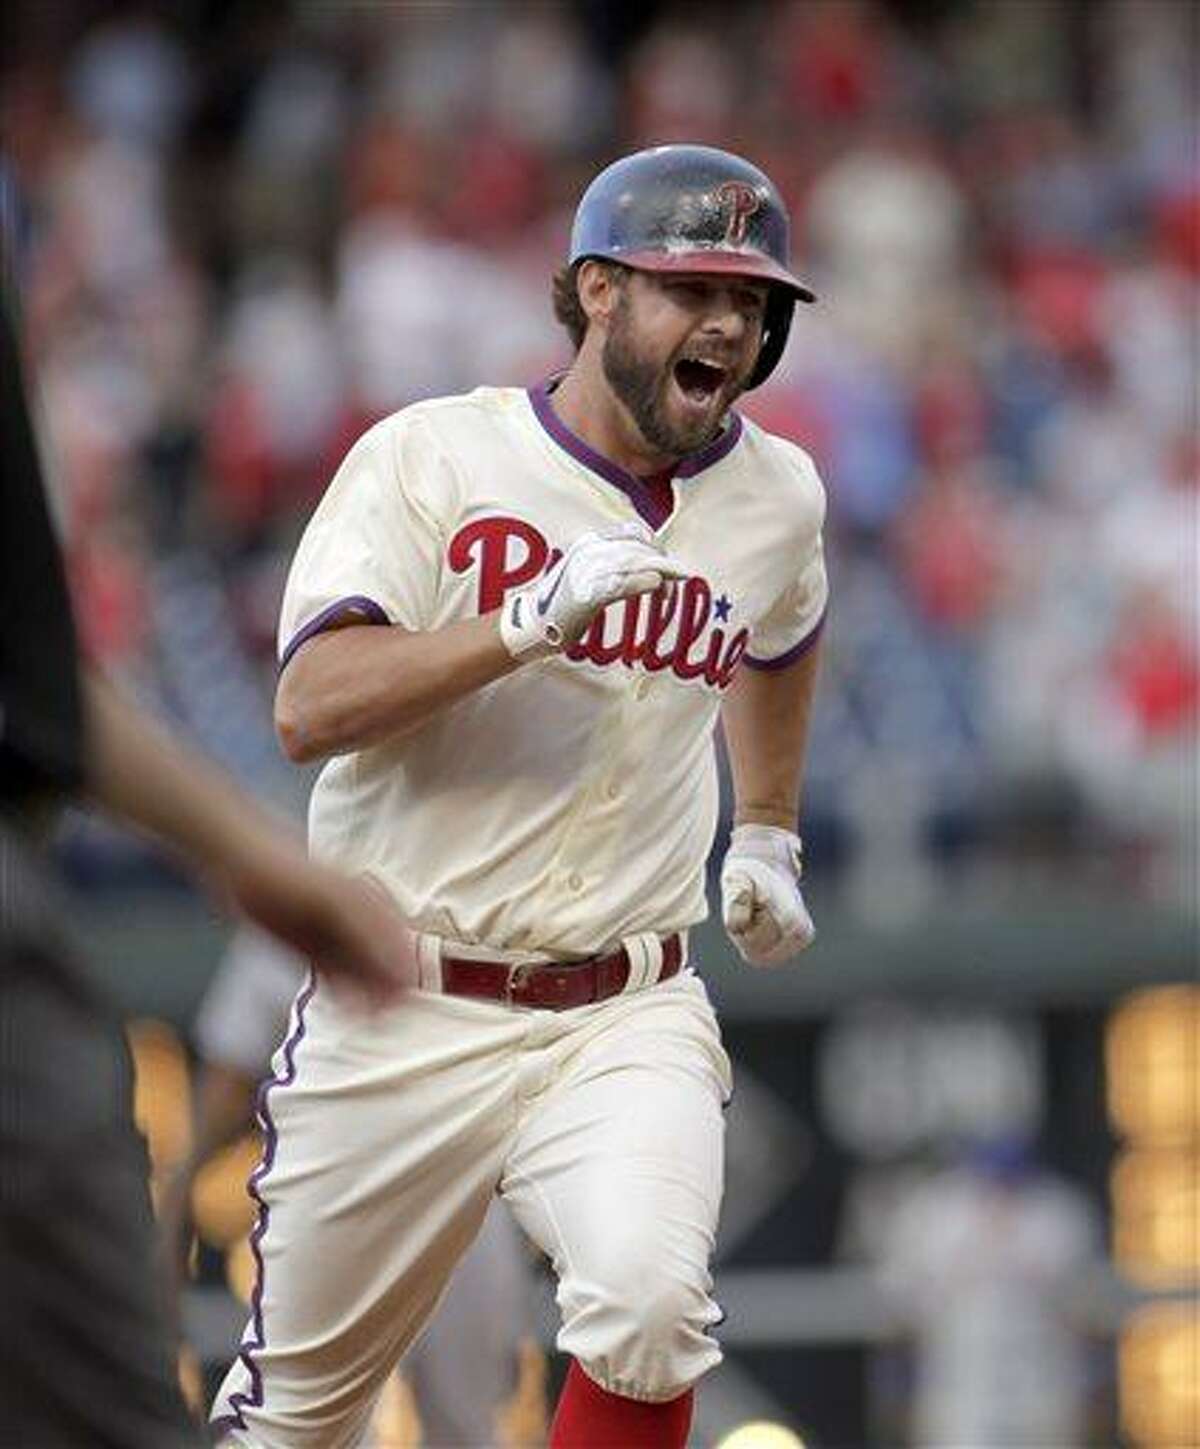 Philadelphia Phillies' Kevin Frandsen runs the bases after he hit a solo home run against the New York Mets in the ninth inning of a baseball game Saturday, June 22, 2013, in Philadelphia. The Phillies won 8-7. (AP Photo/H. Rumph Jr)